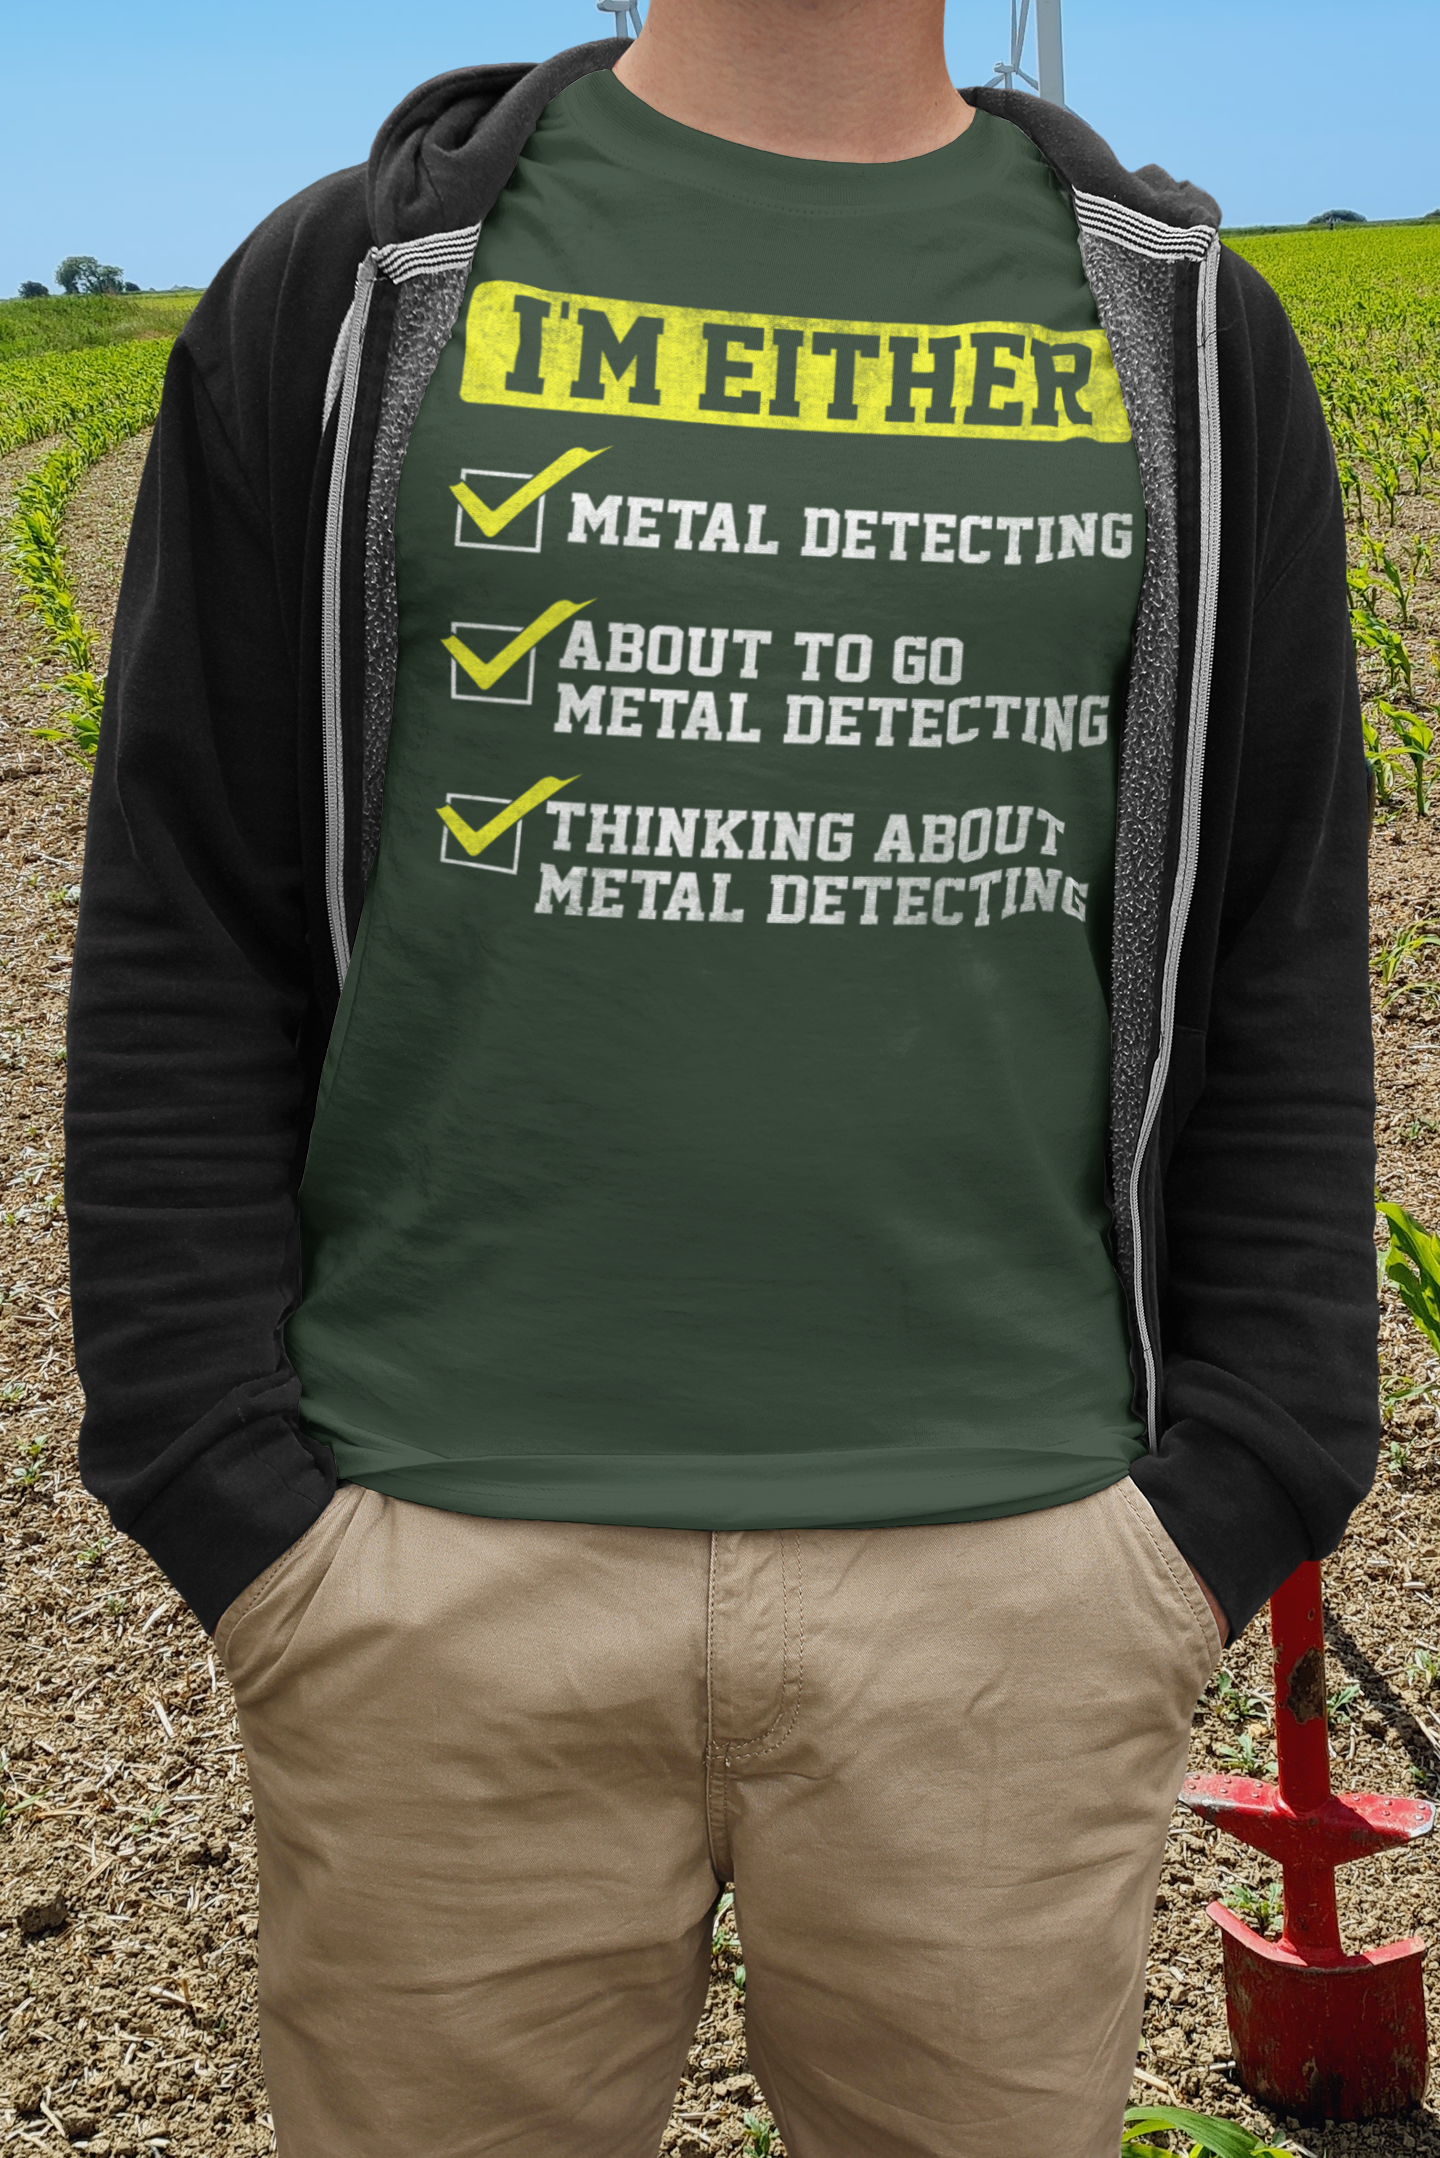 I'm either: ✓ metal-detecting ✓ about to go metal detecting ✓ thinking about metal detecting